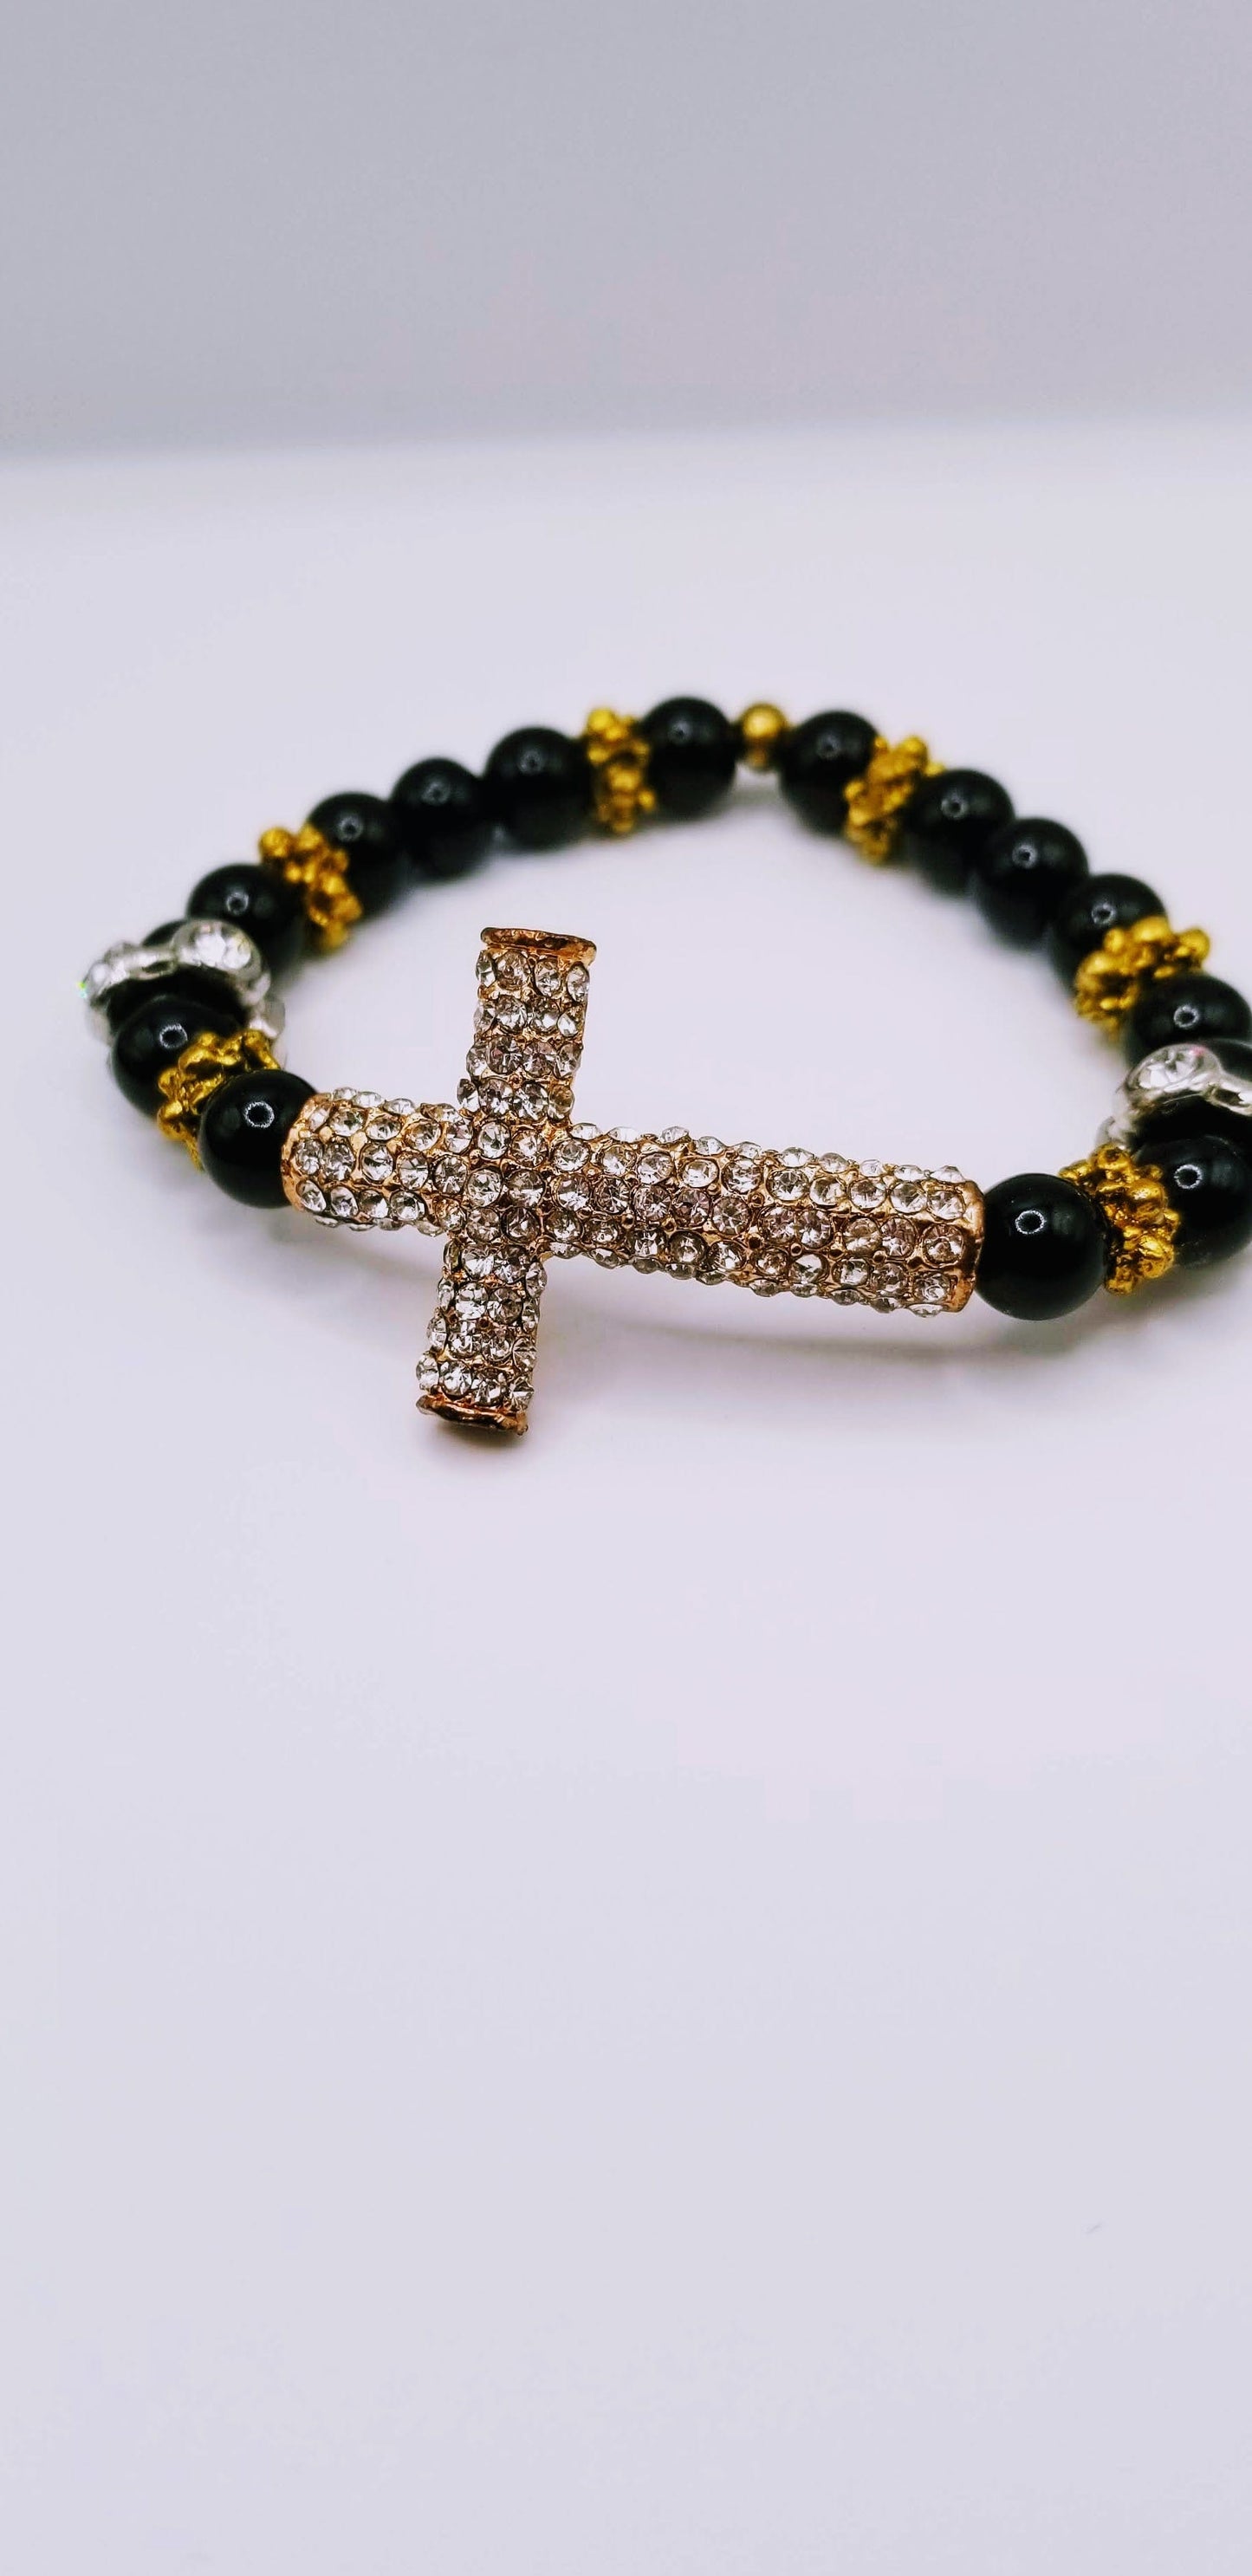 Handcrafted Jewelry By Teri C Necklace set Black Antiquist Cross And Rhinestone Bracelet